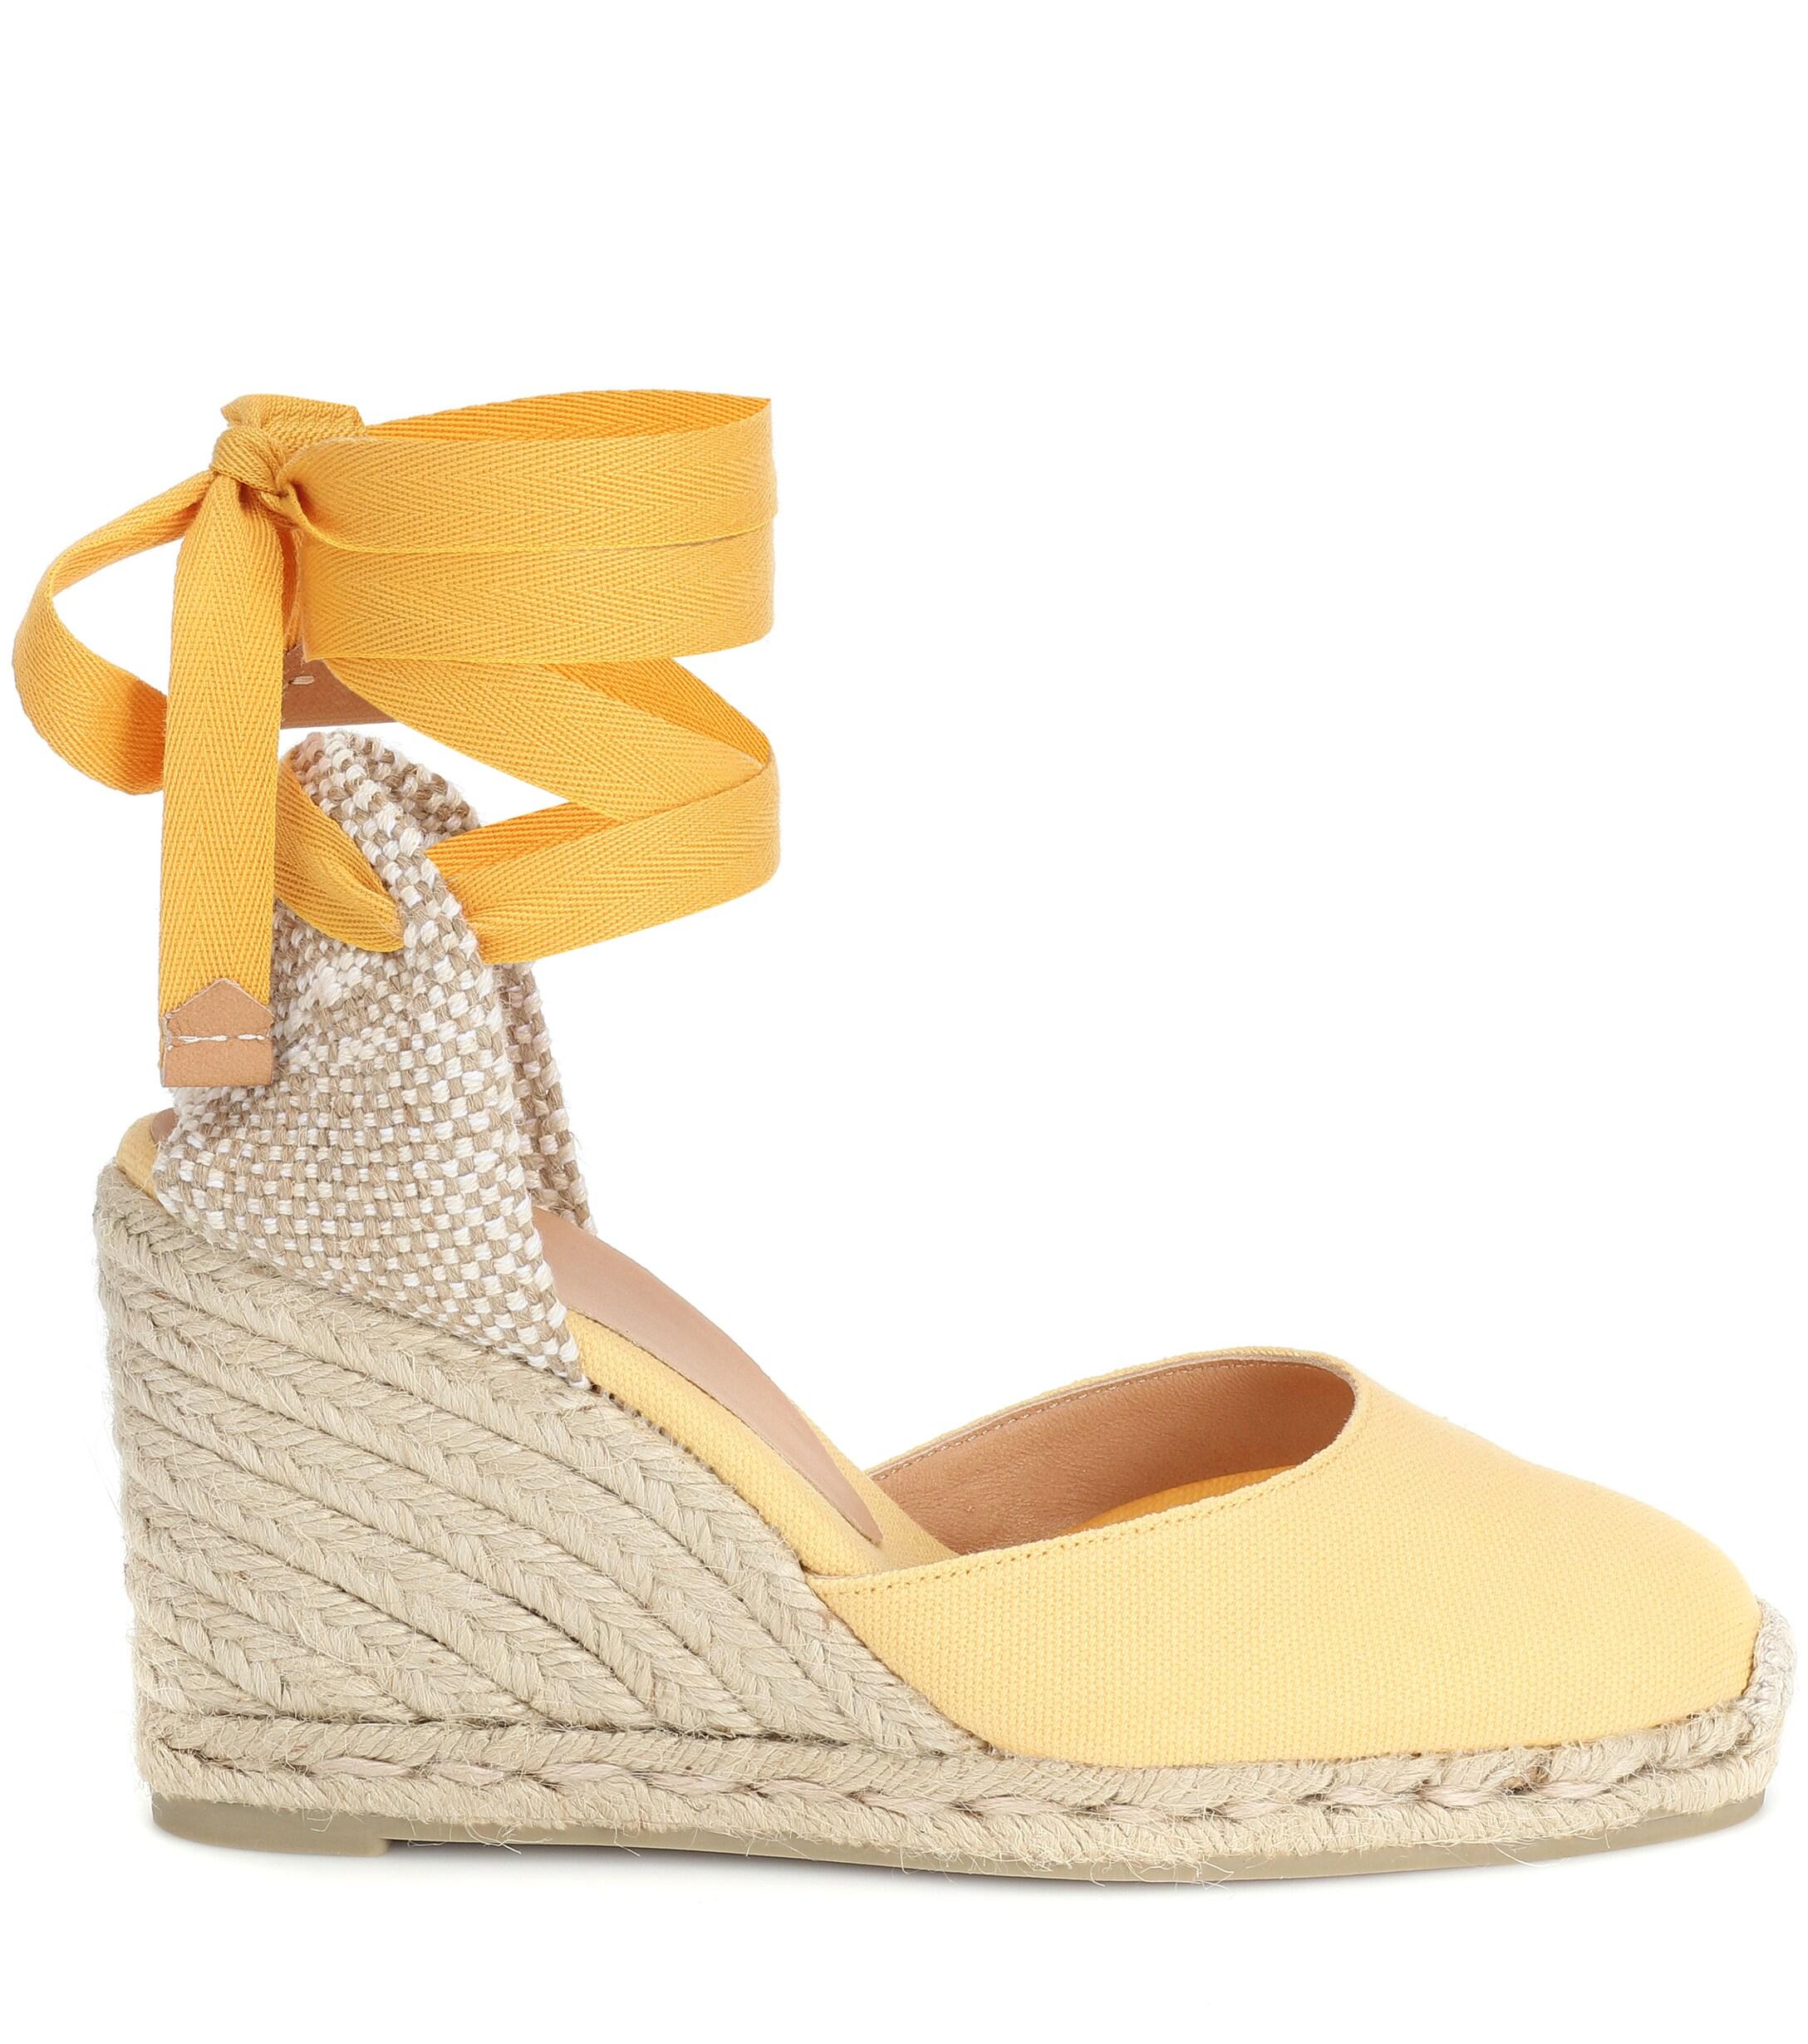 Castaner Cotton Carina Canvas Wedge Espadrilles in Yellow - Save 41% - Lyst